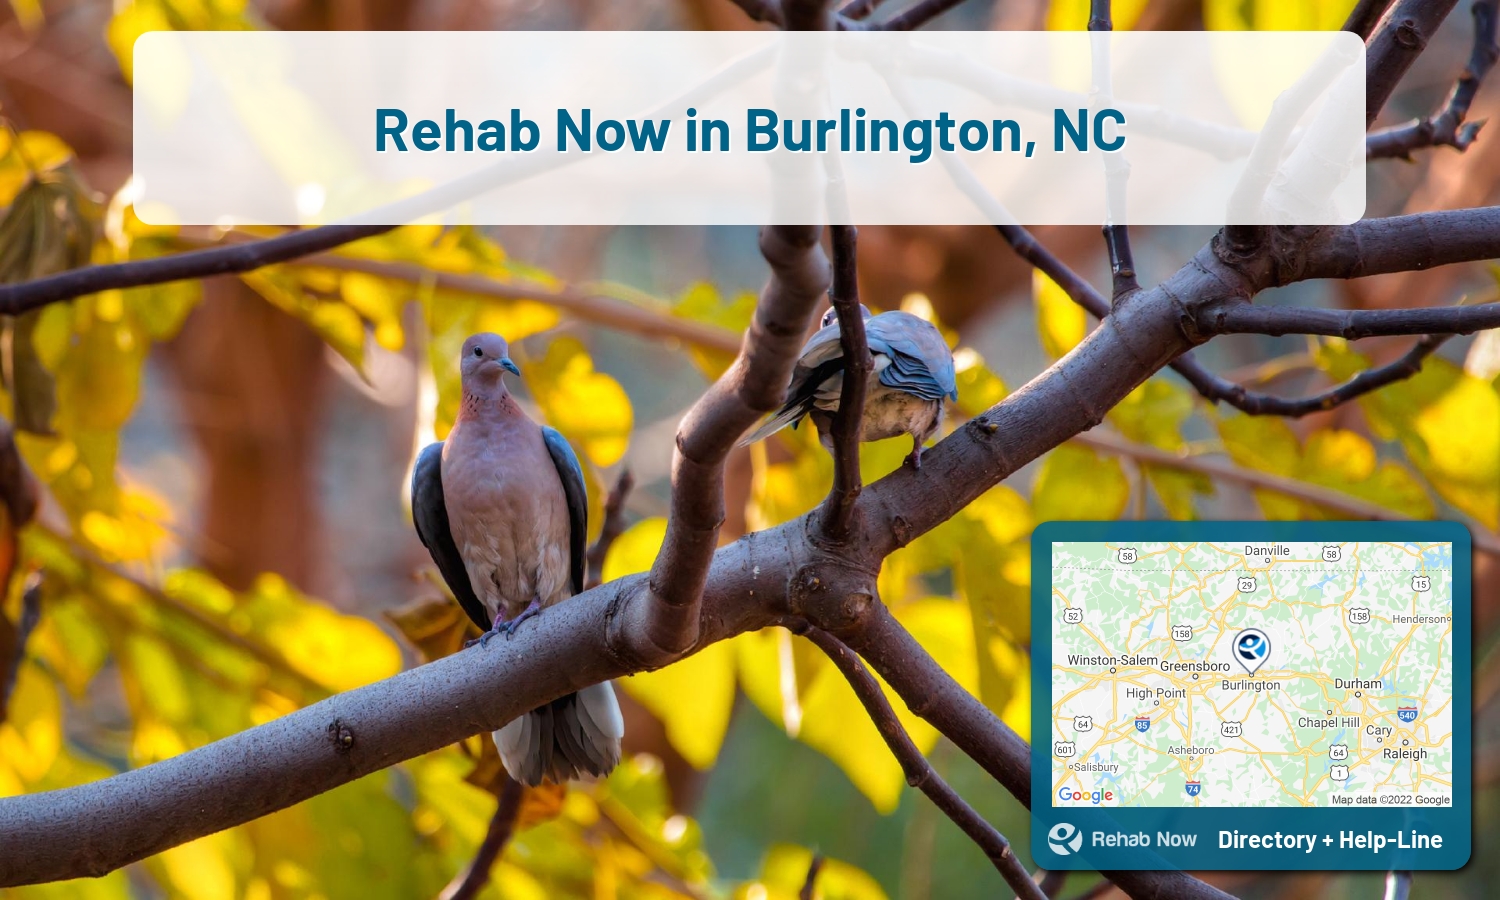 Find drug rehab and alcohol treatment services in Burlington. Our experts help you find a center in Burlington, North Carolina